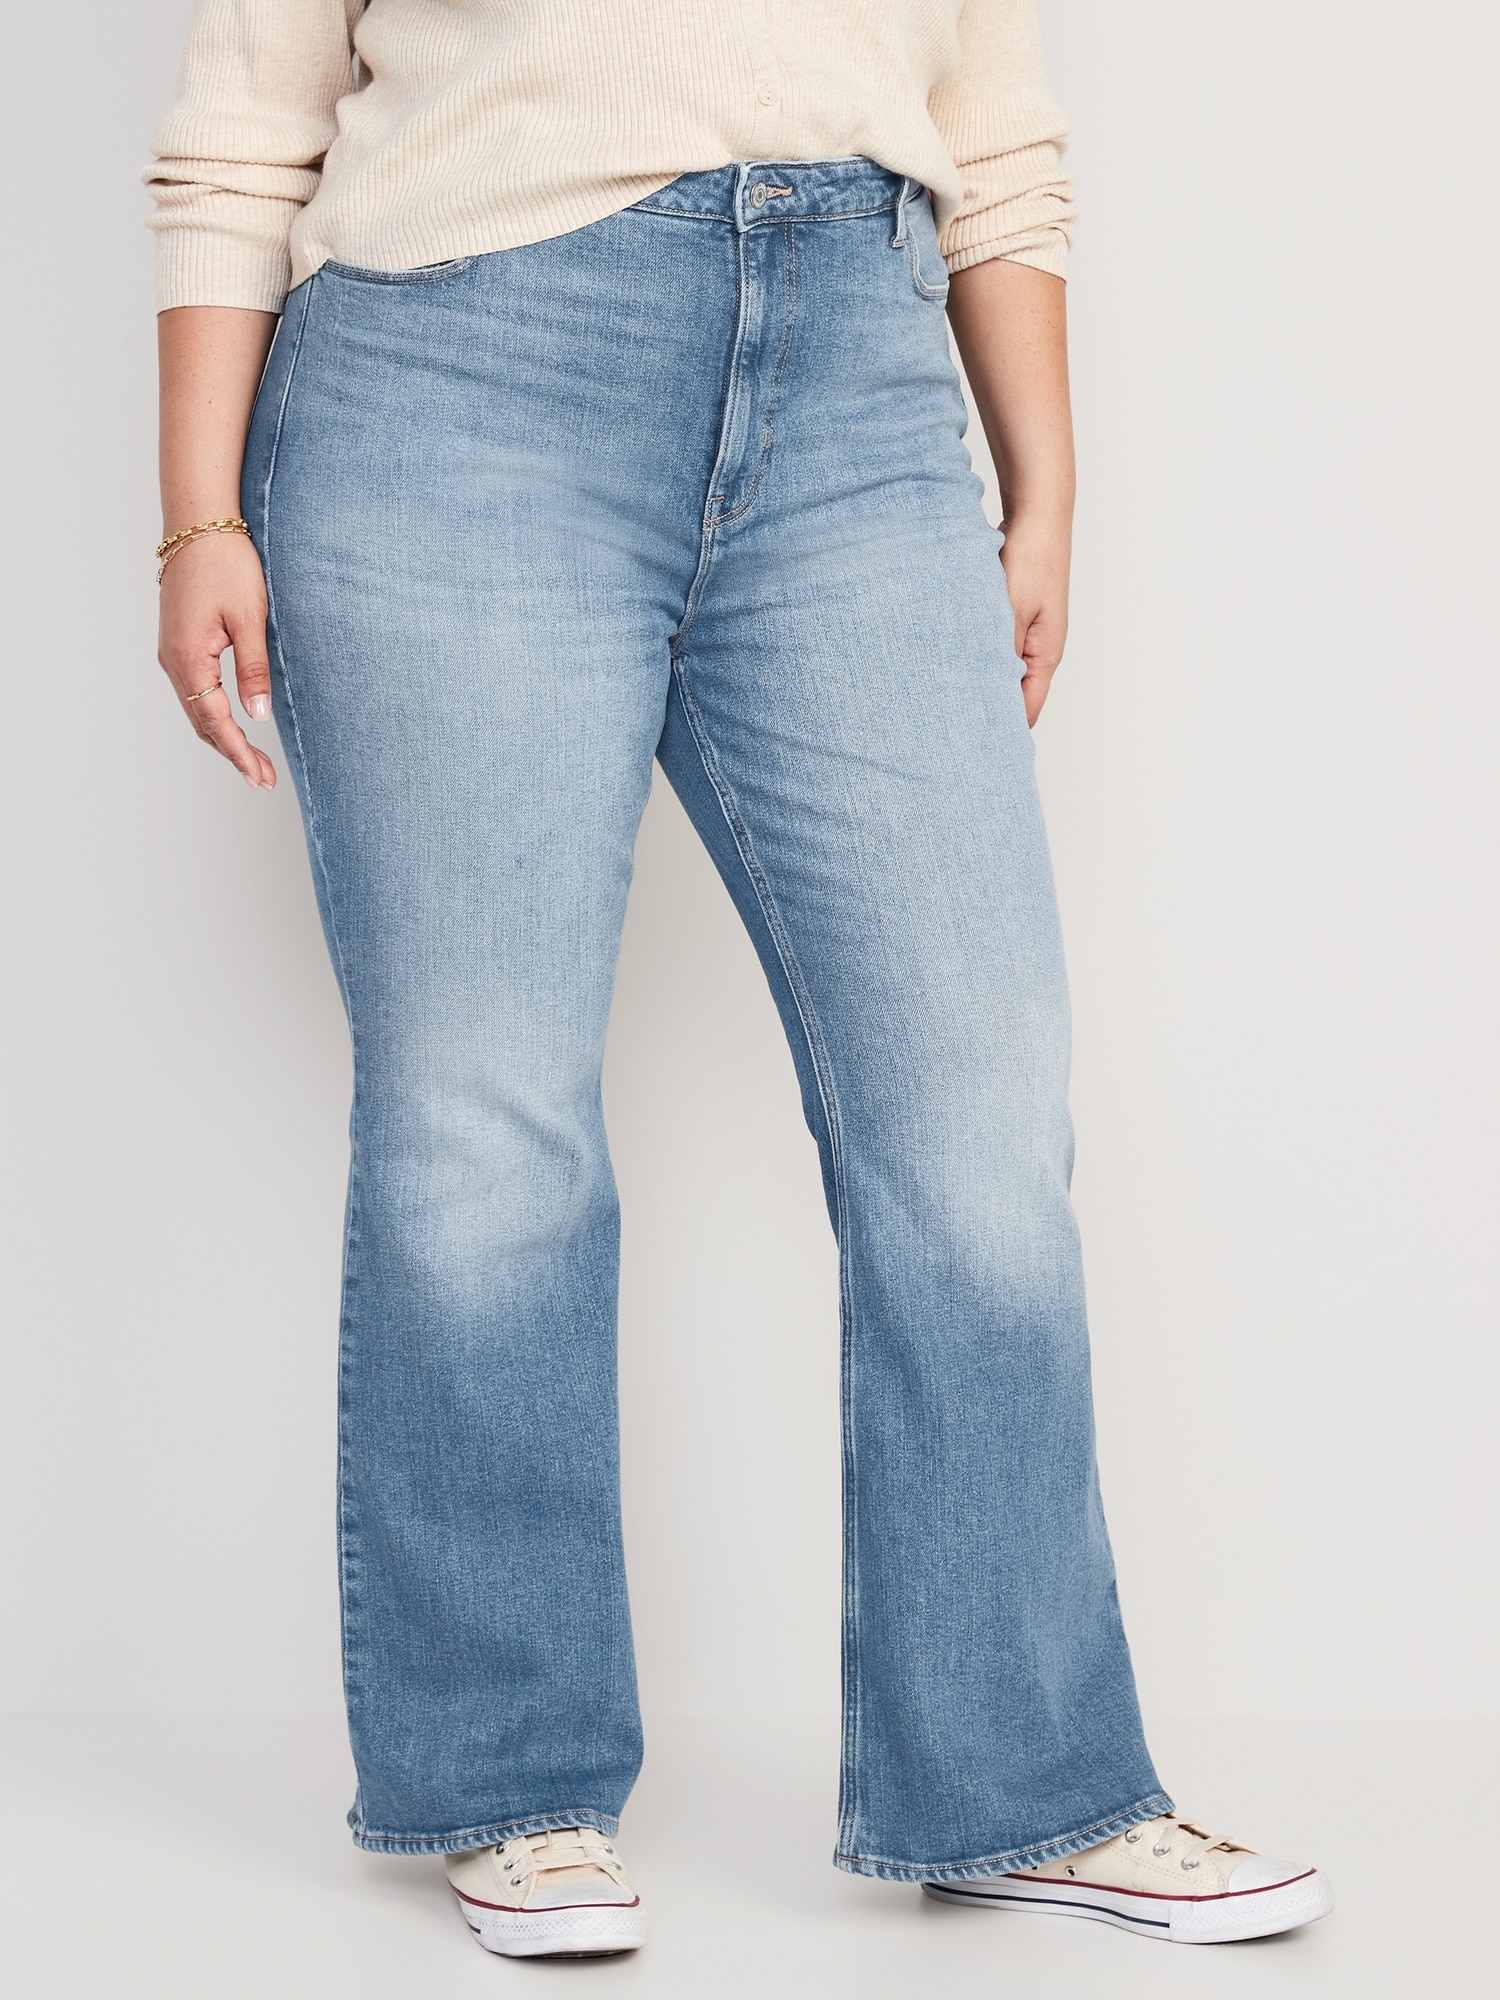 Old Navy Raisin Arizona Higher High-Waisted Pop-Color Flare Jeans Size 24